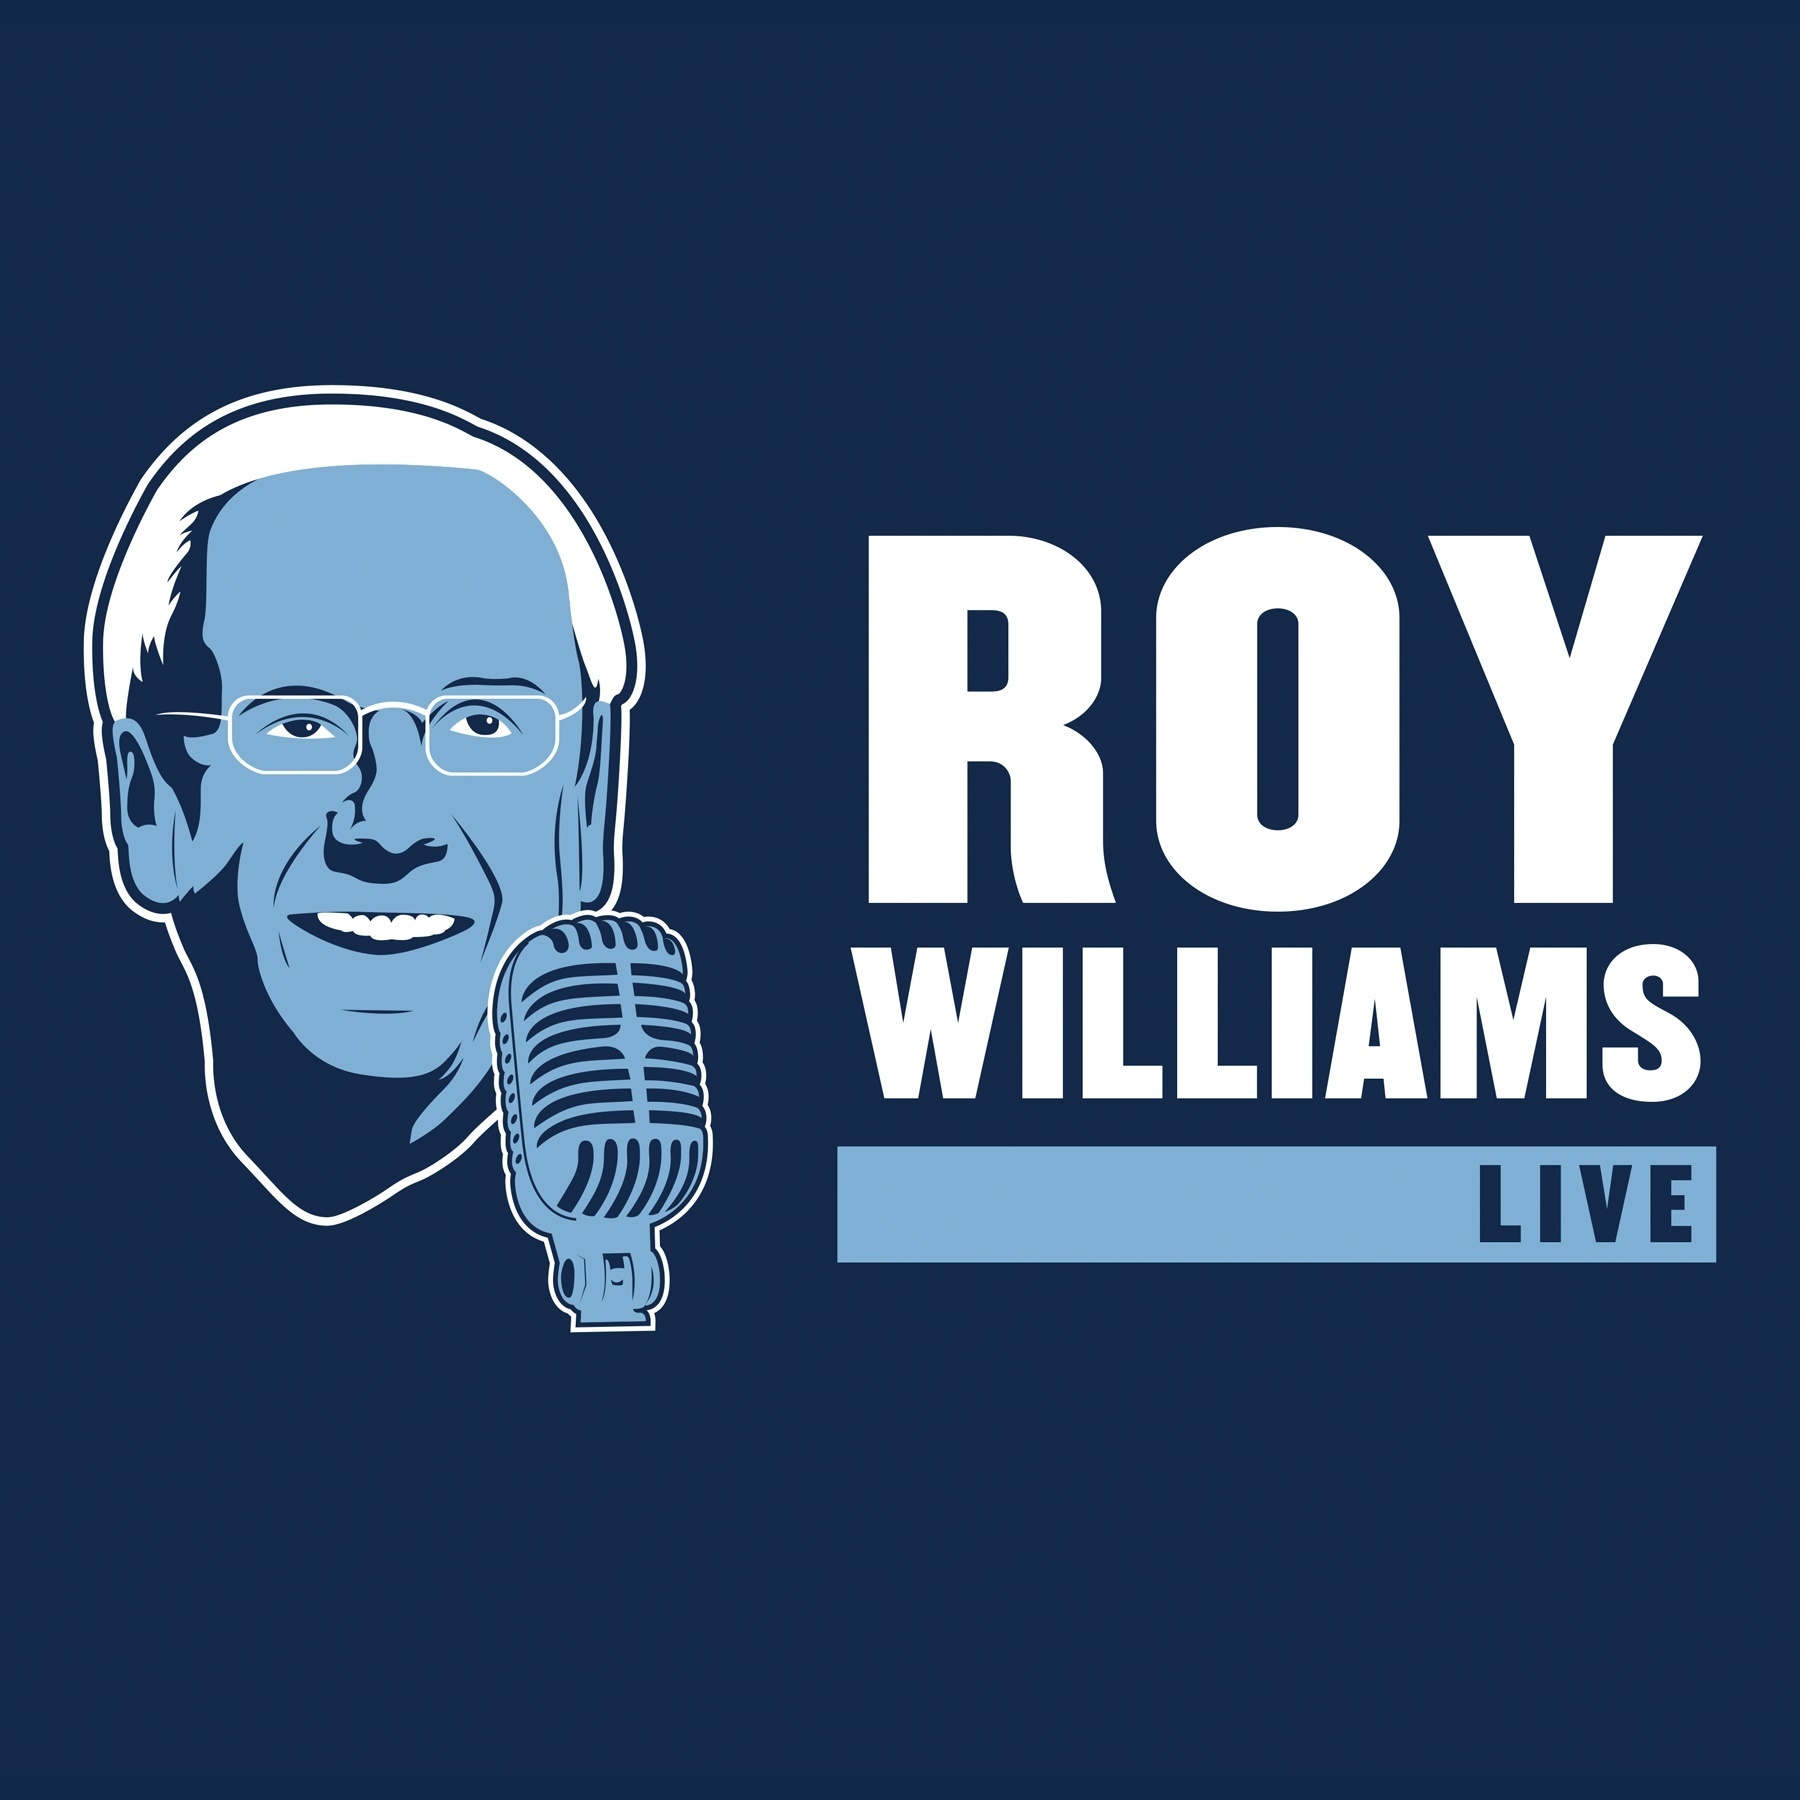 Roy Williams Live from 2-13-18